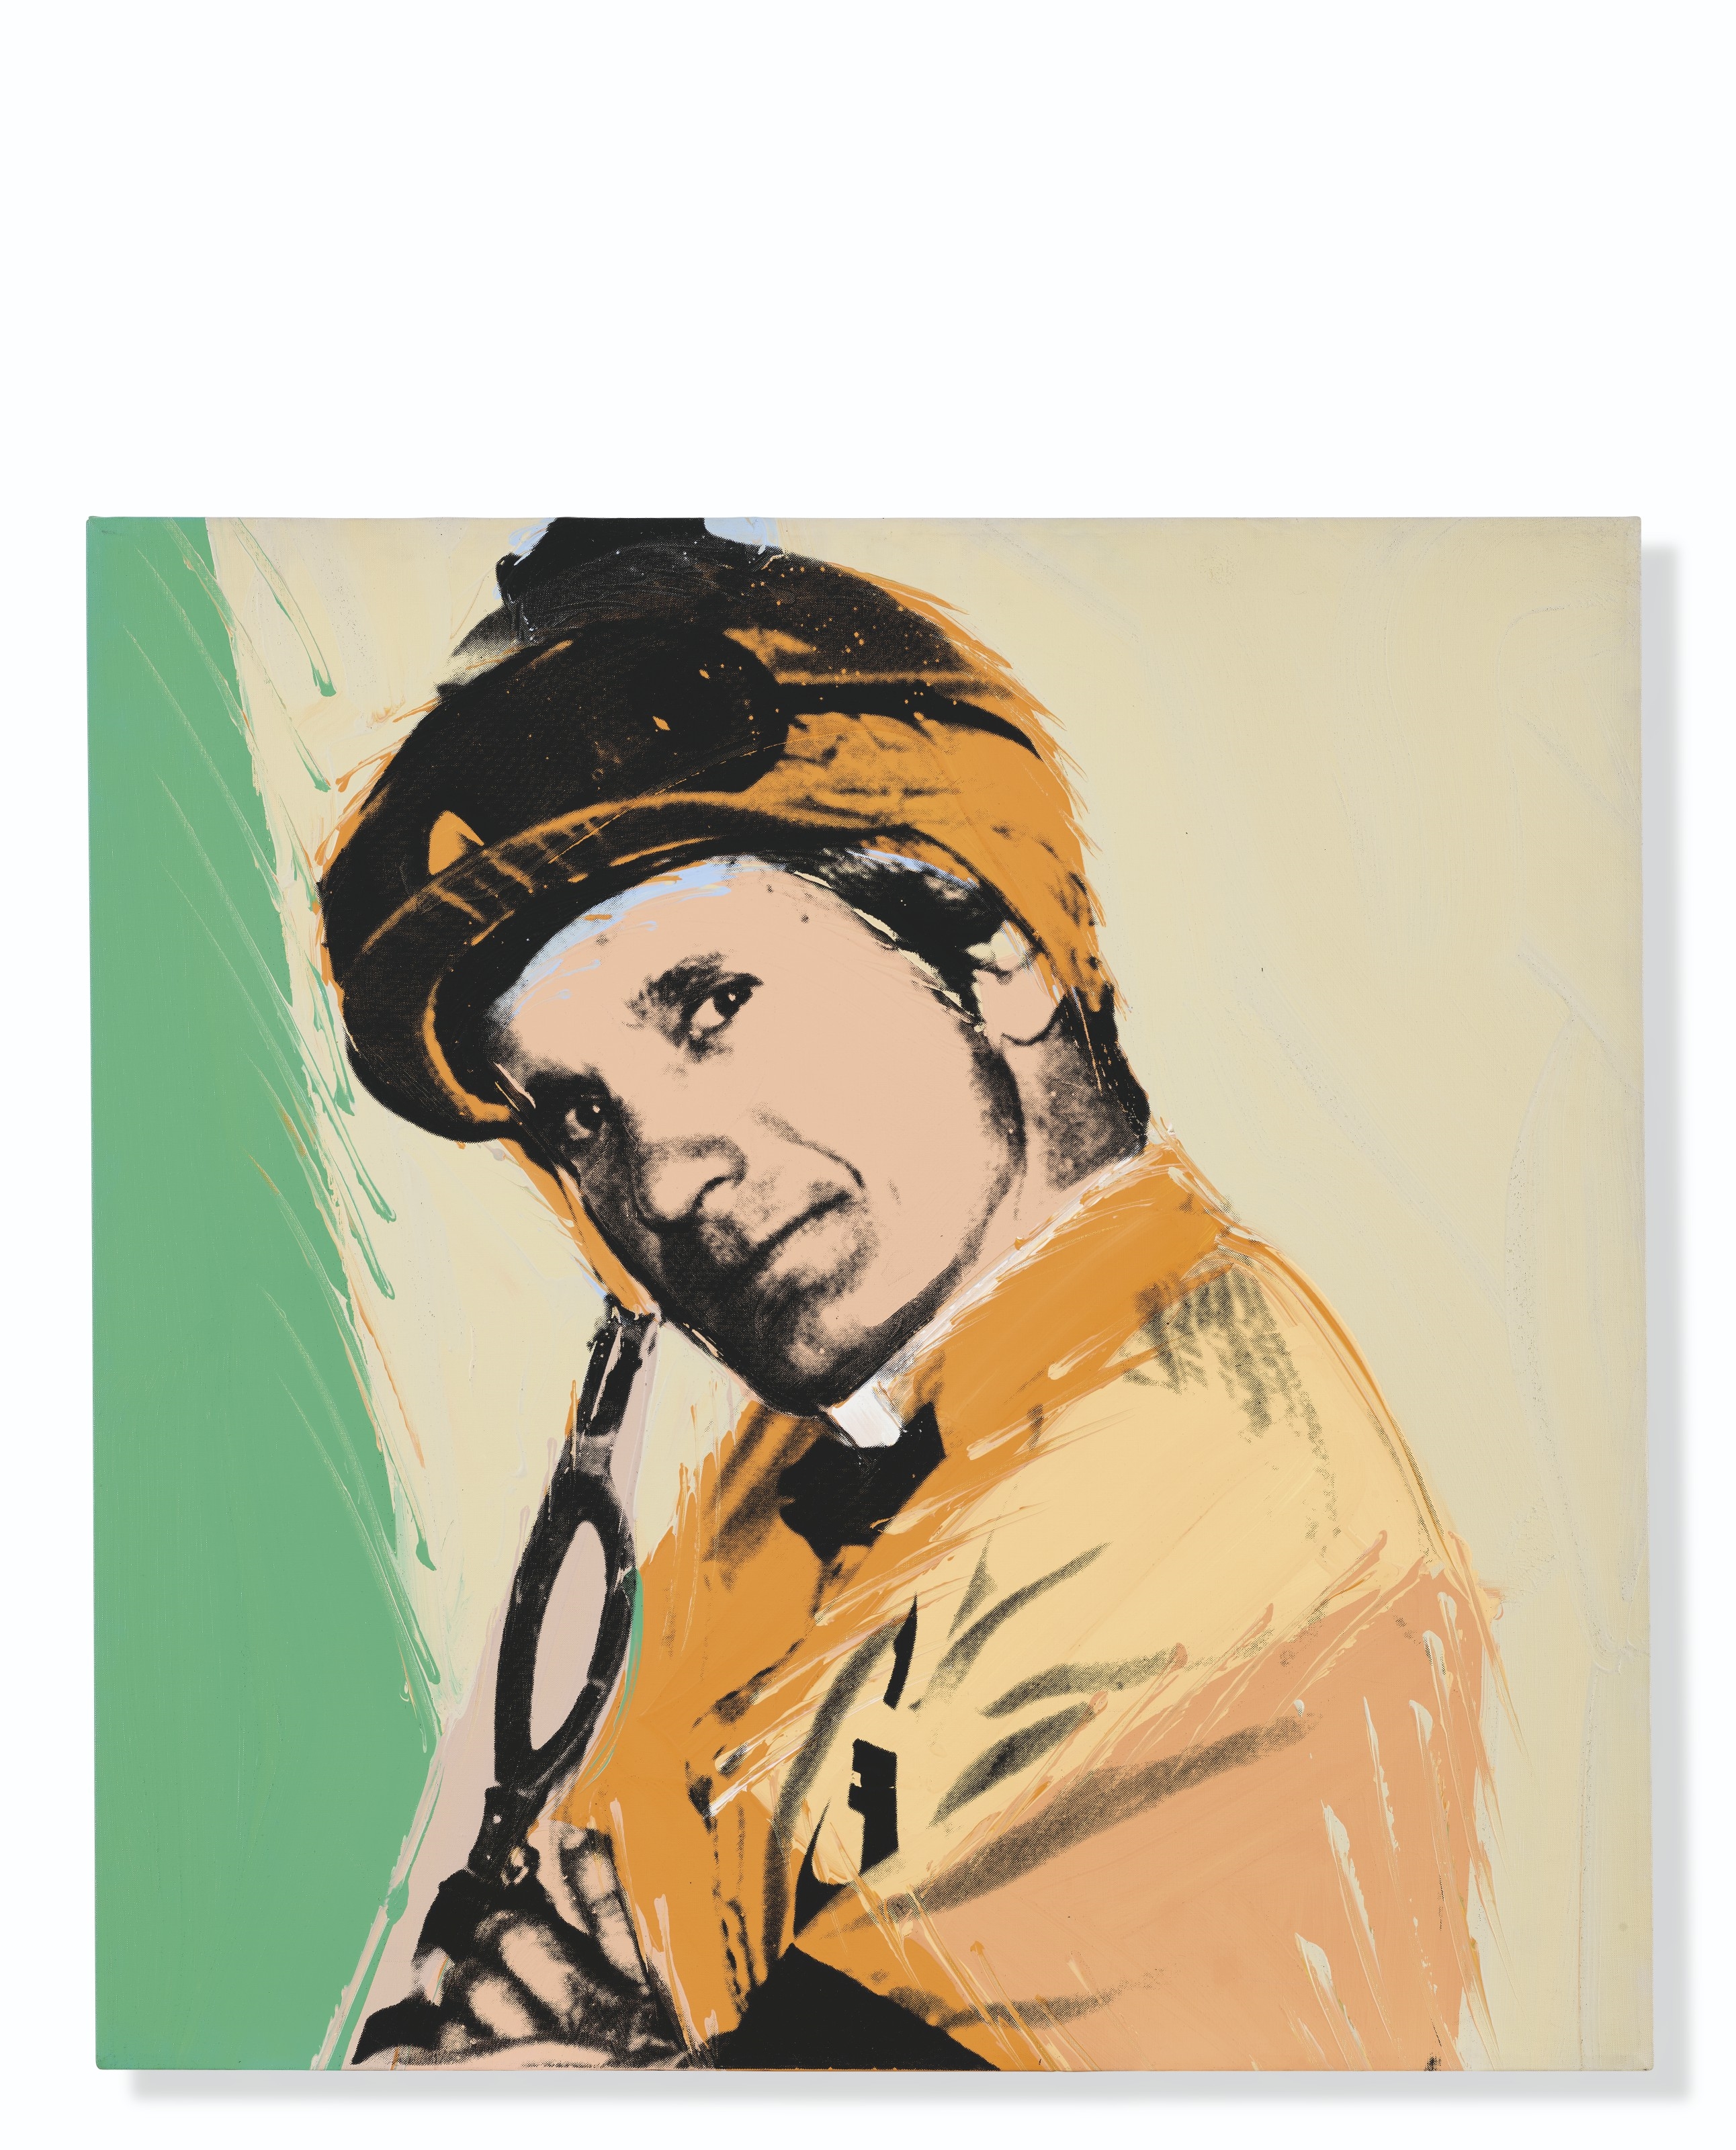 Willie Shoemaker by Andy Warhol, Painted in 1977